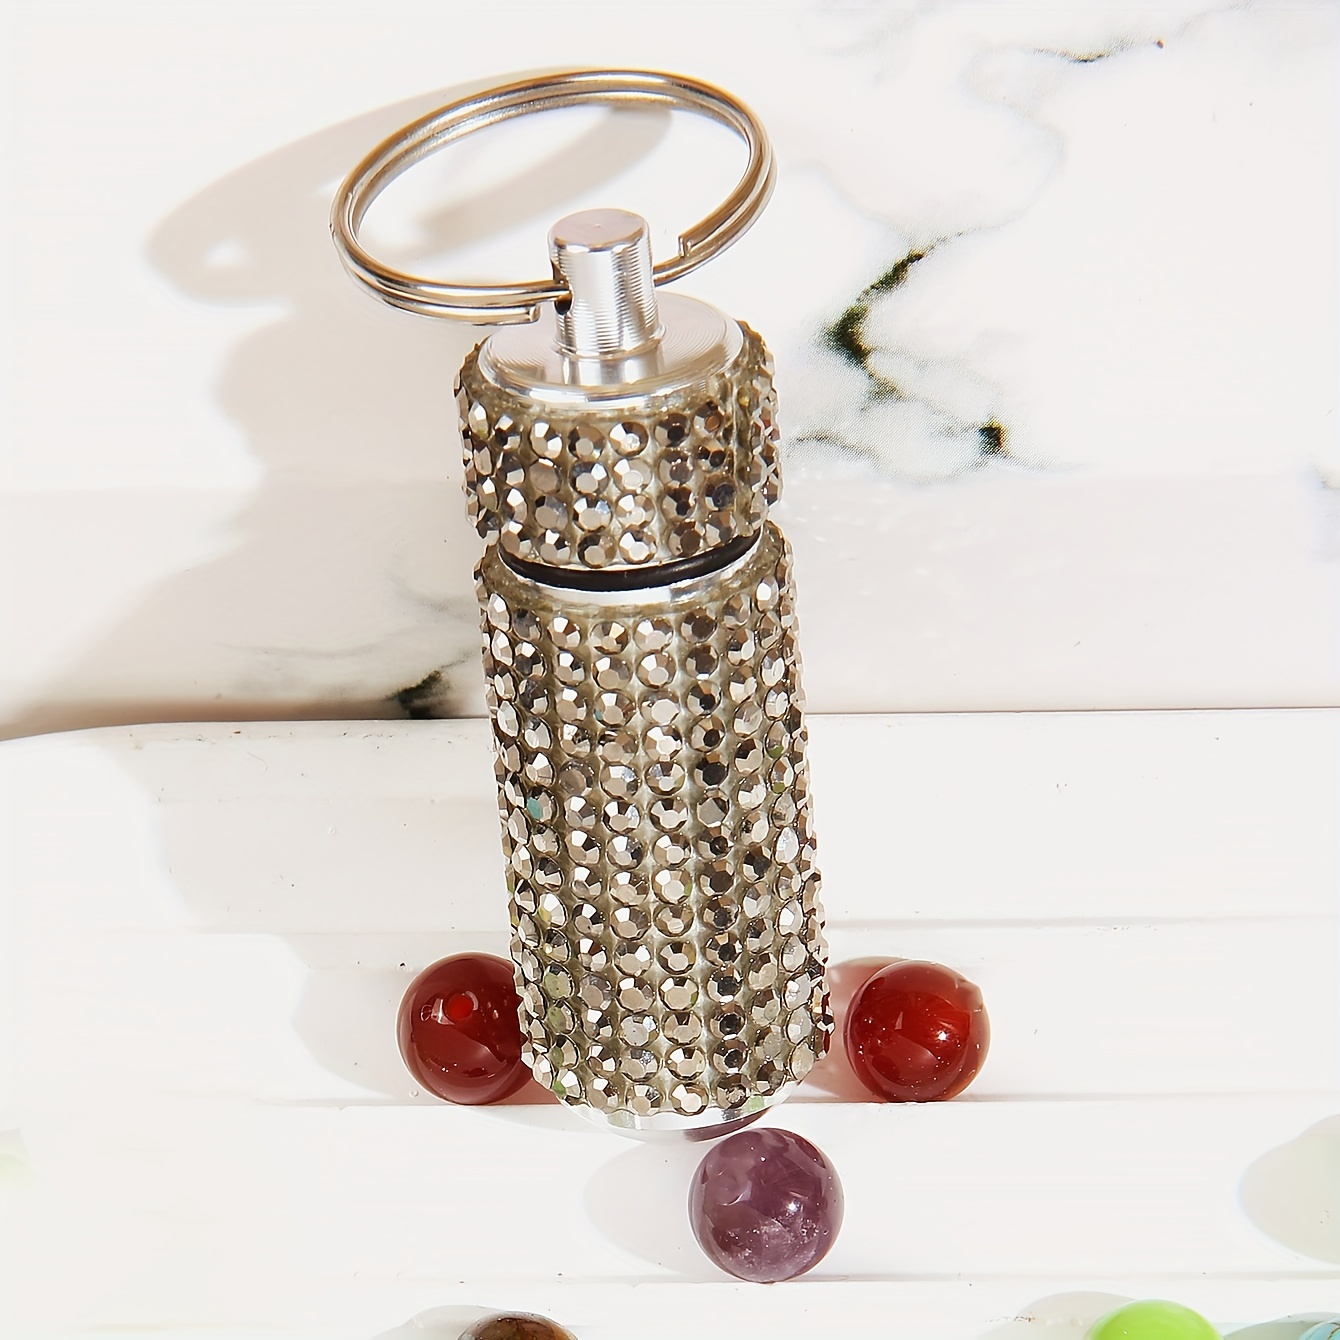 Bling Small Pill Case, Bling Pill Case Keychain, Bling Products